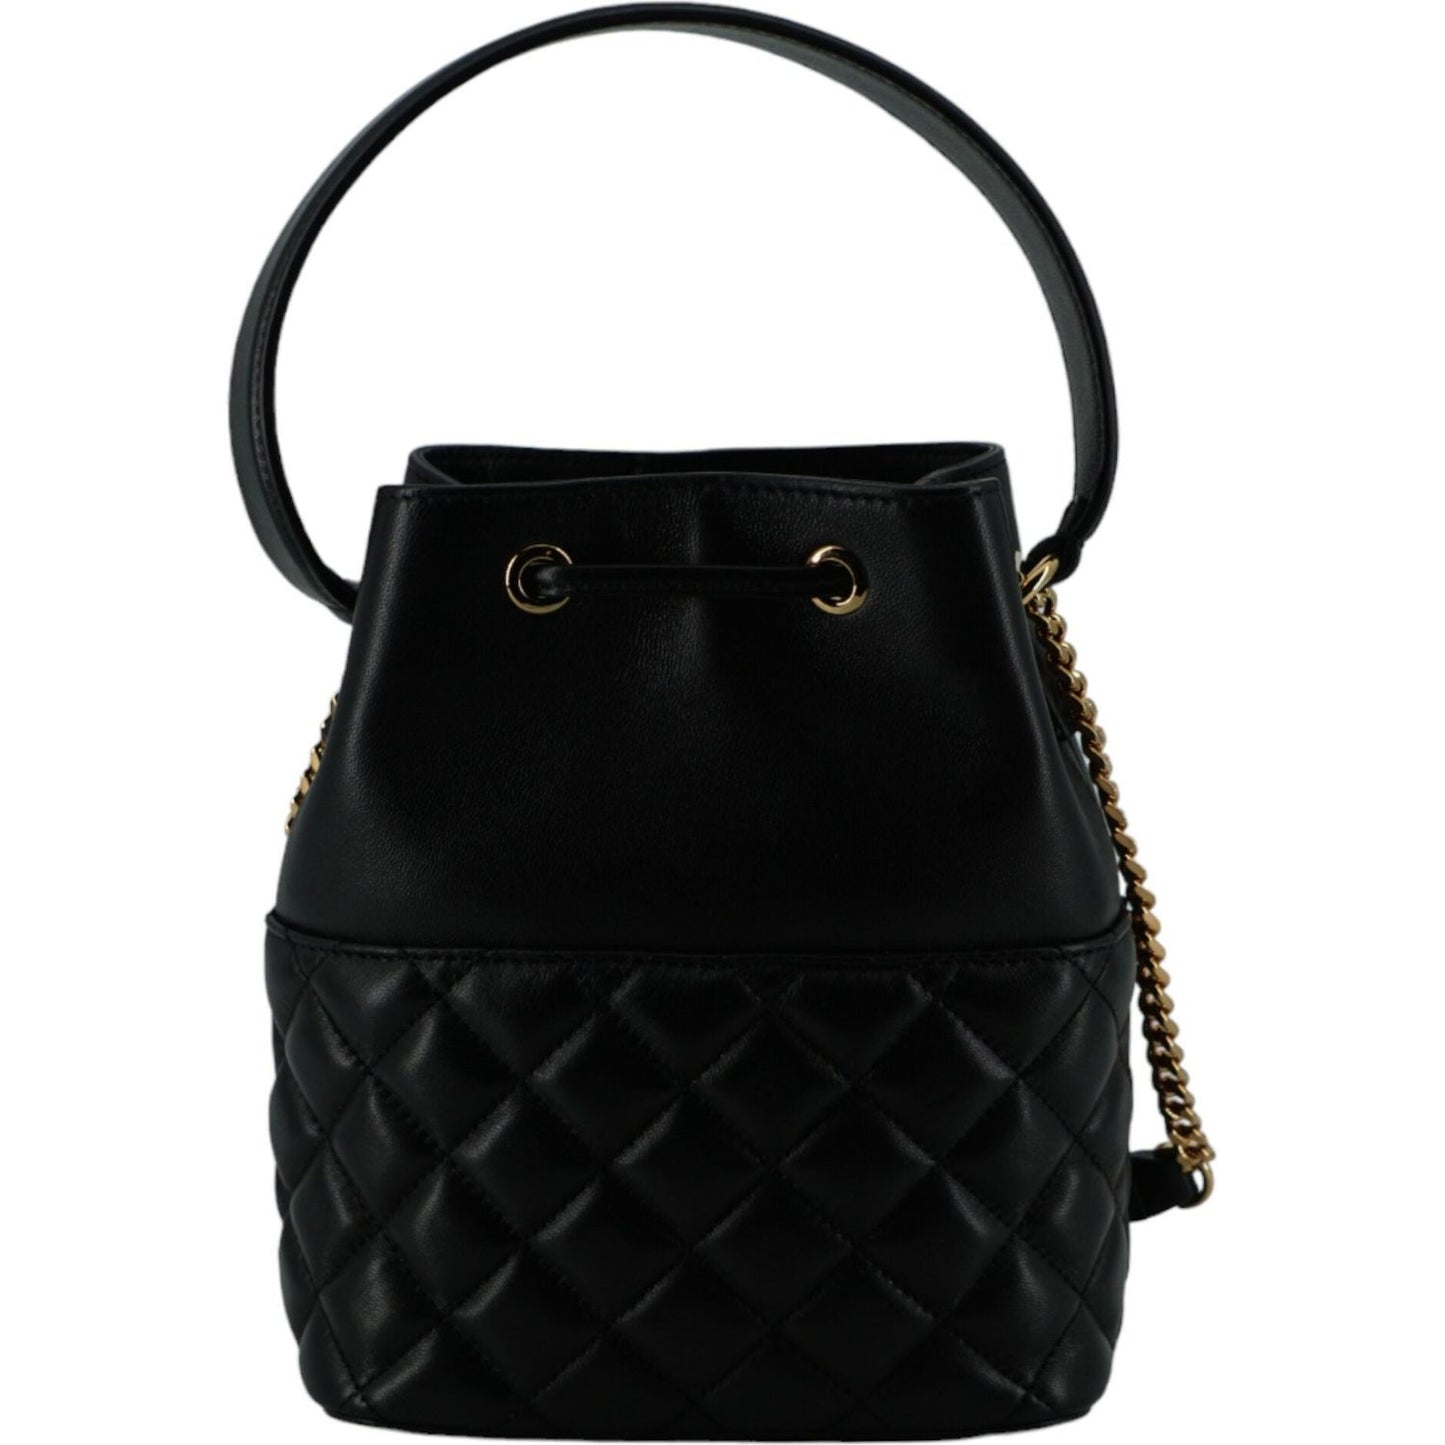 Versace Black Calf Leather Small Bucket Shoulder Bag black-calf-leather-small-bucket-shoulder-bag DSC01114-scaled-4d9a28bb-45a.jpg